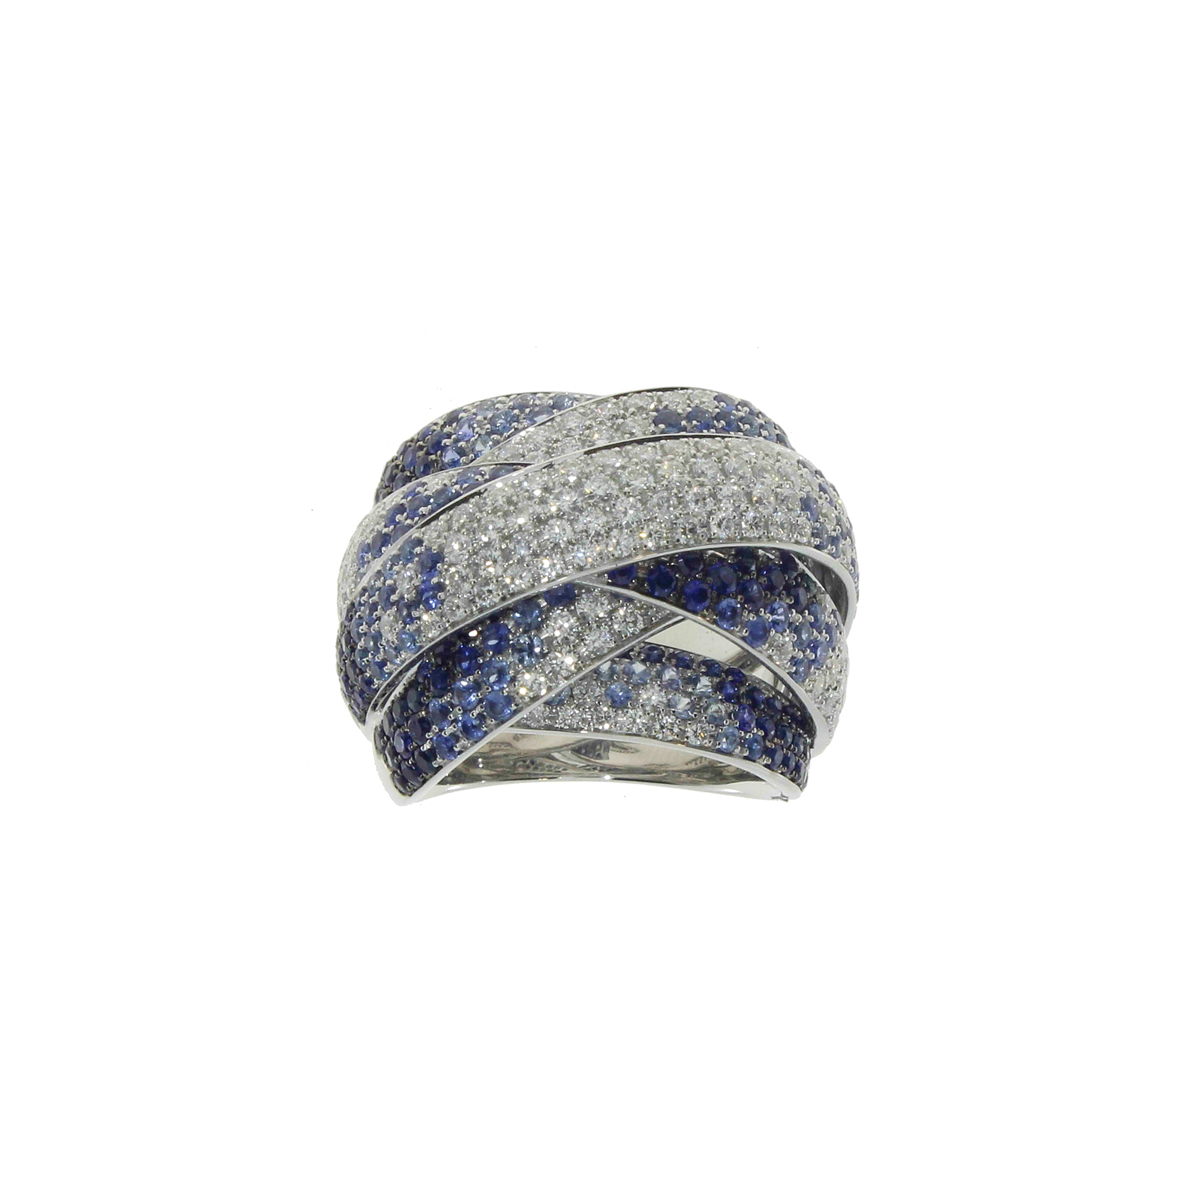 Intertwined Band Ring with Diamonds and Sapphires